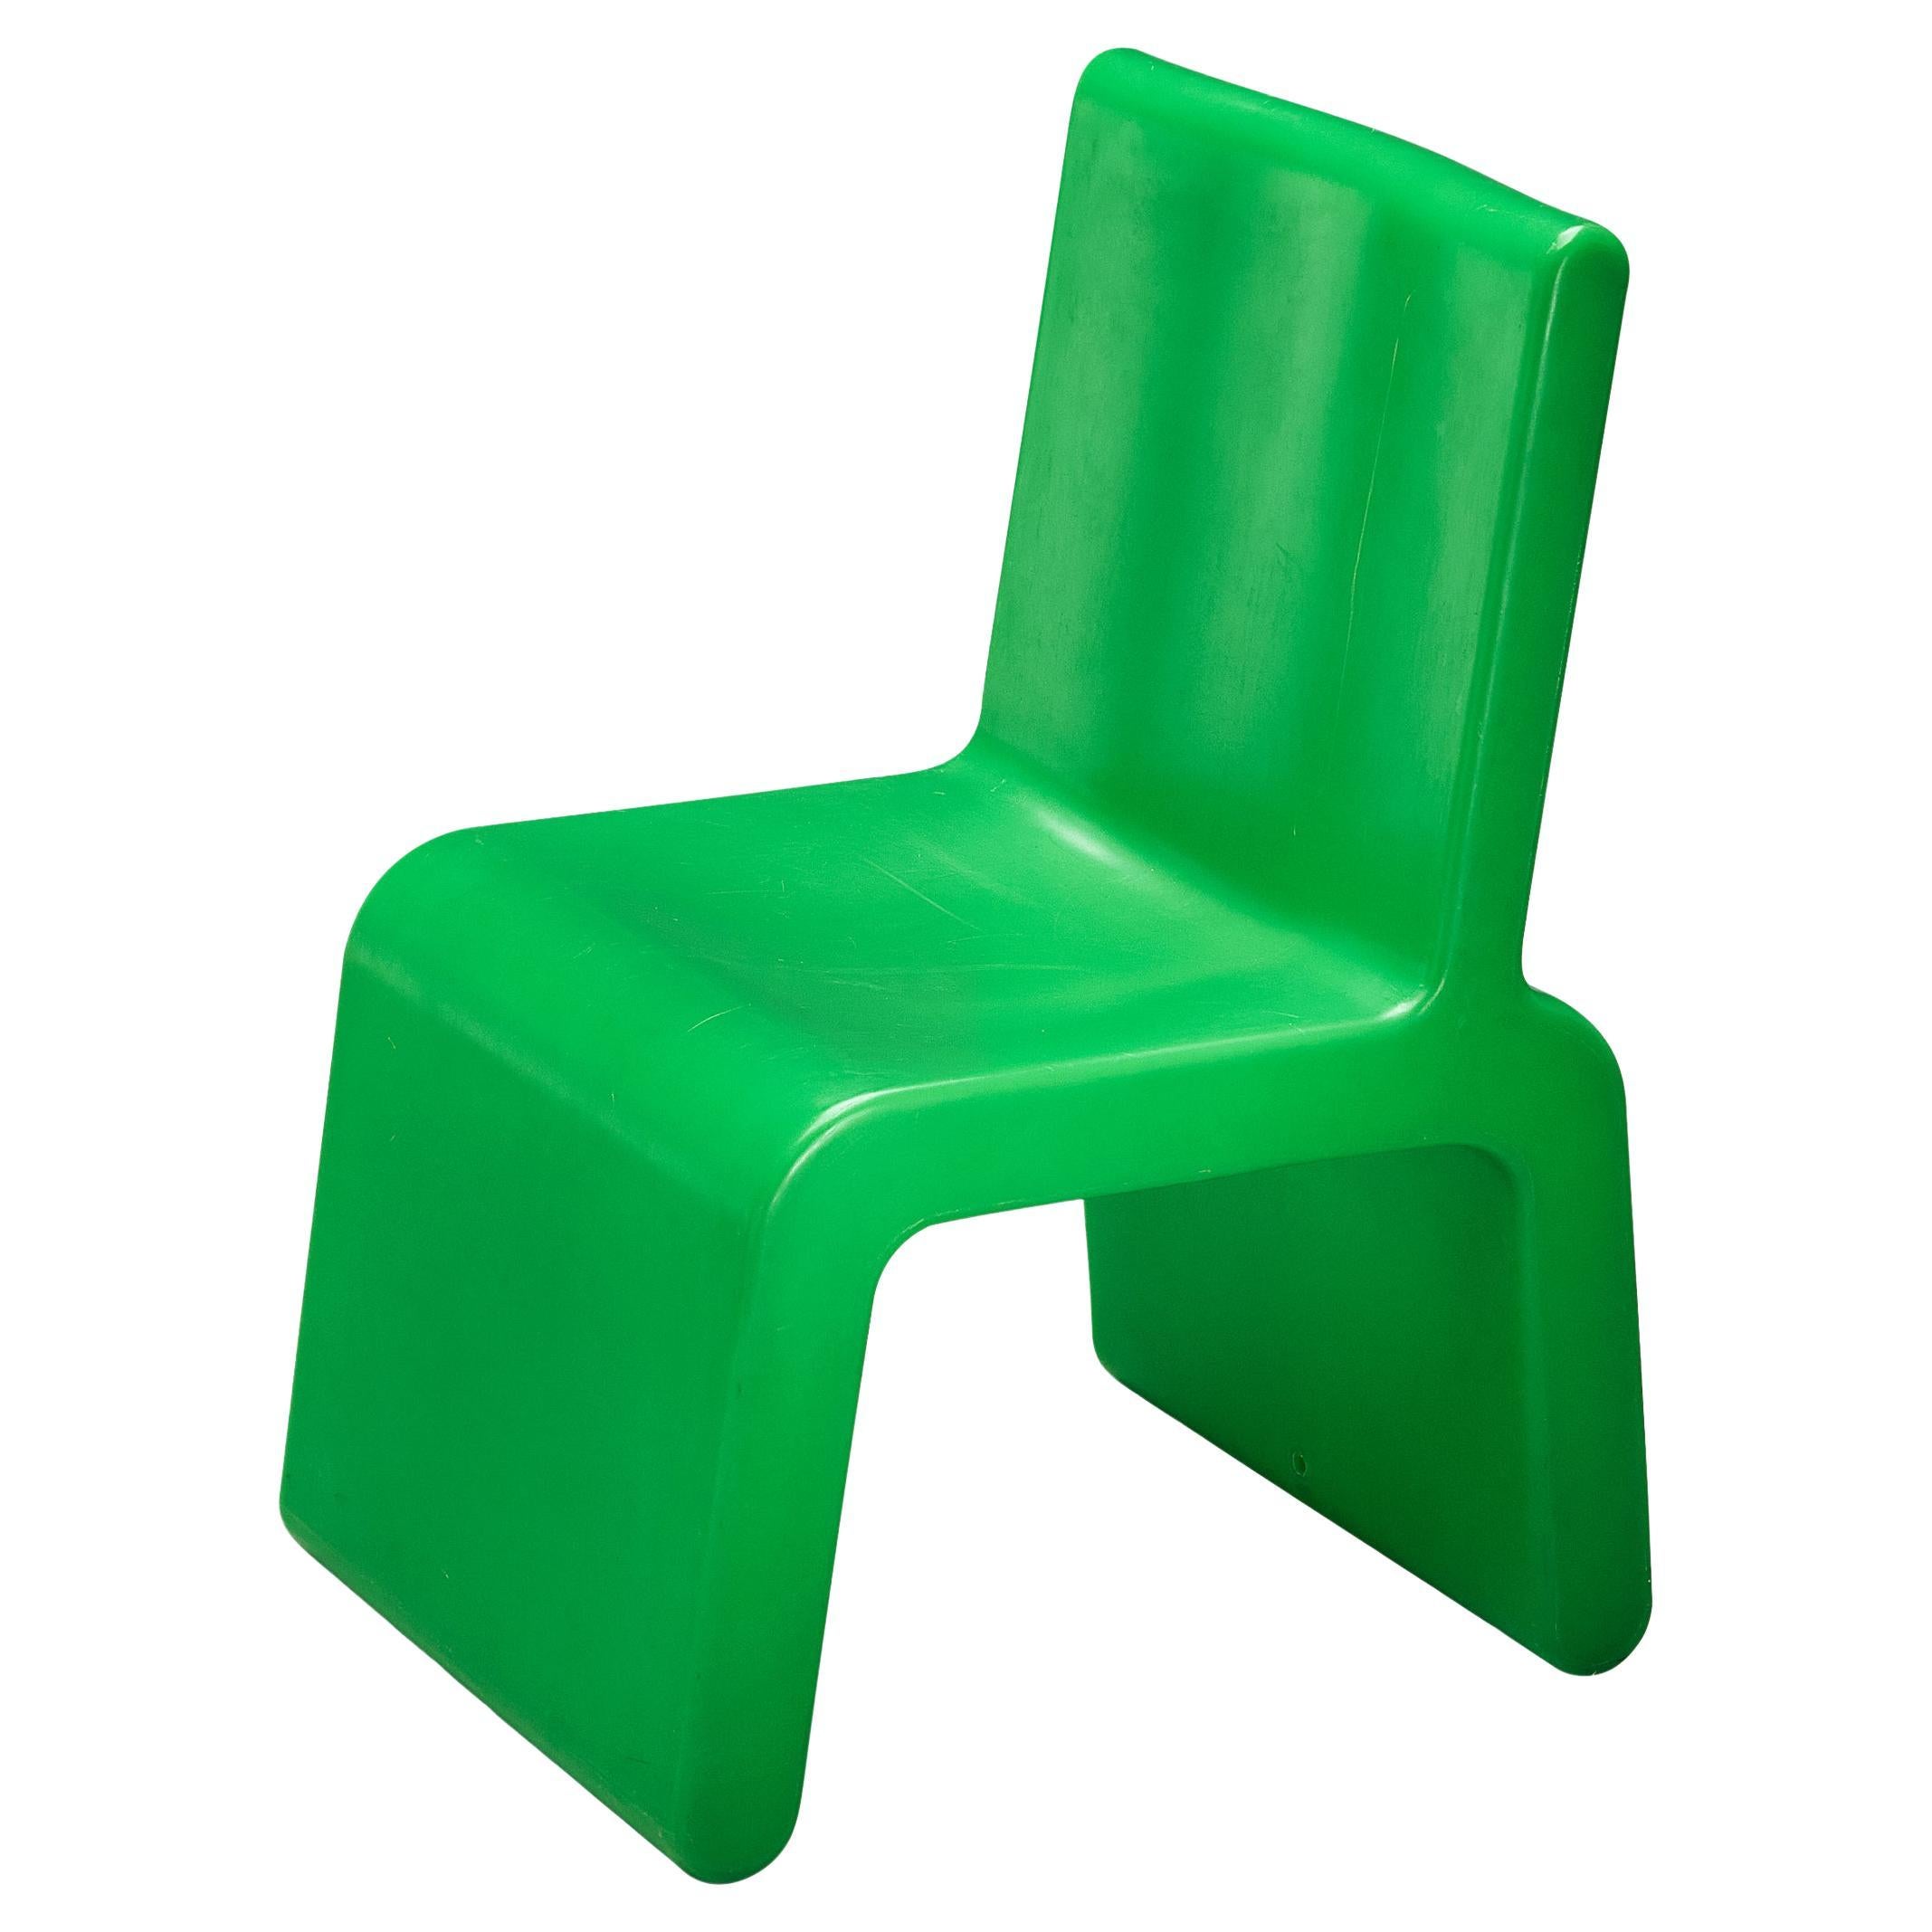 Marc Newson 'Kiss the Future' Chair in Green Molded Polypropylene 